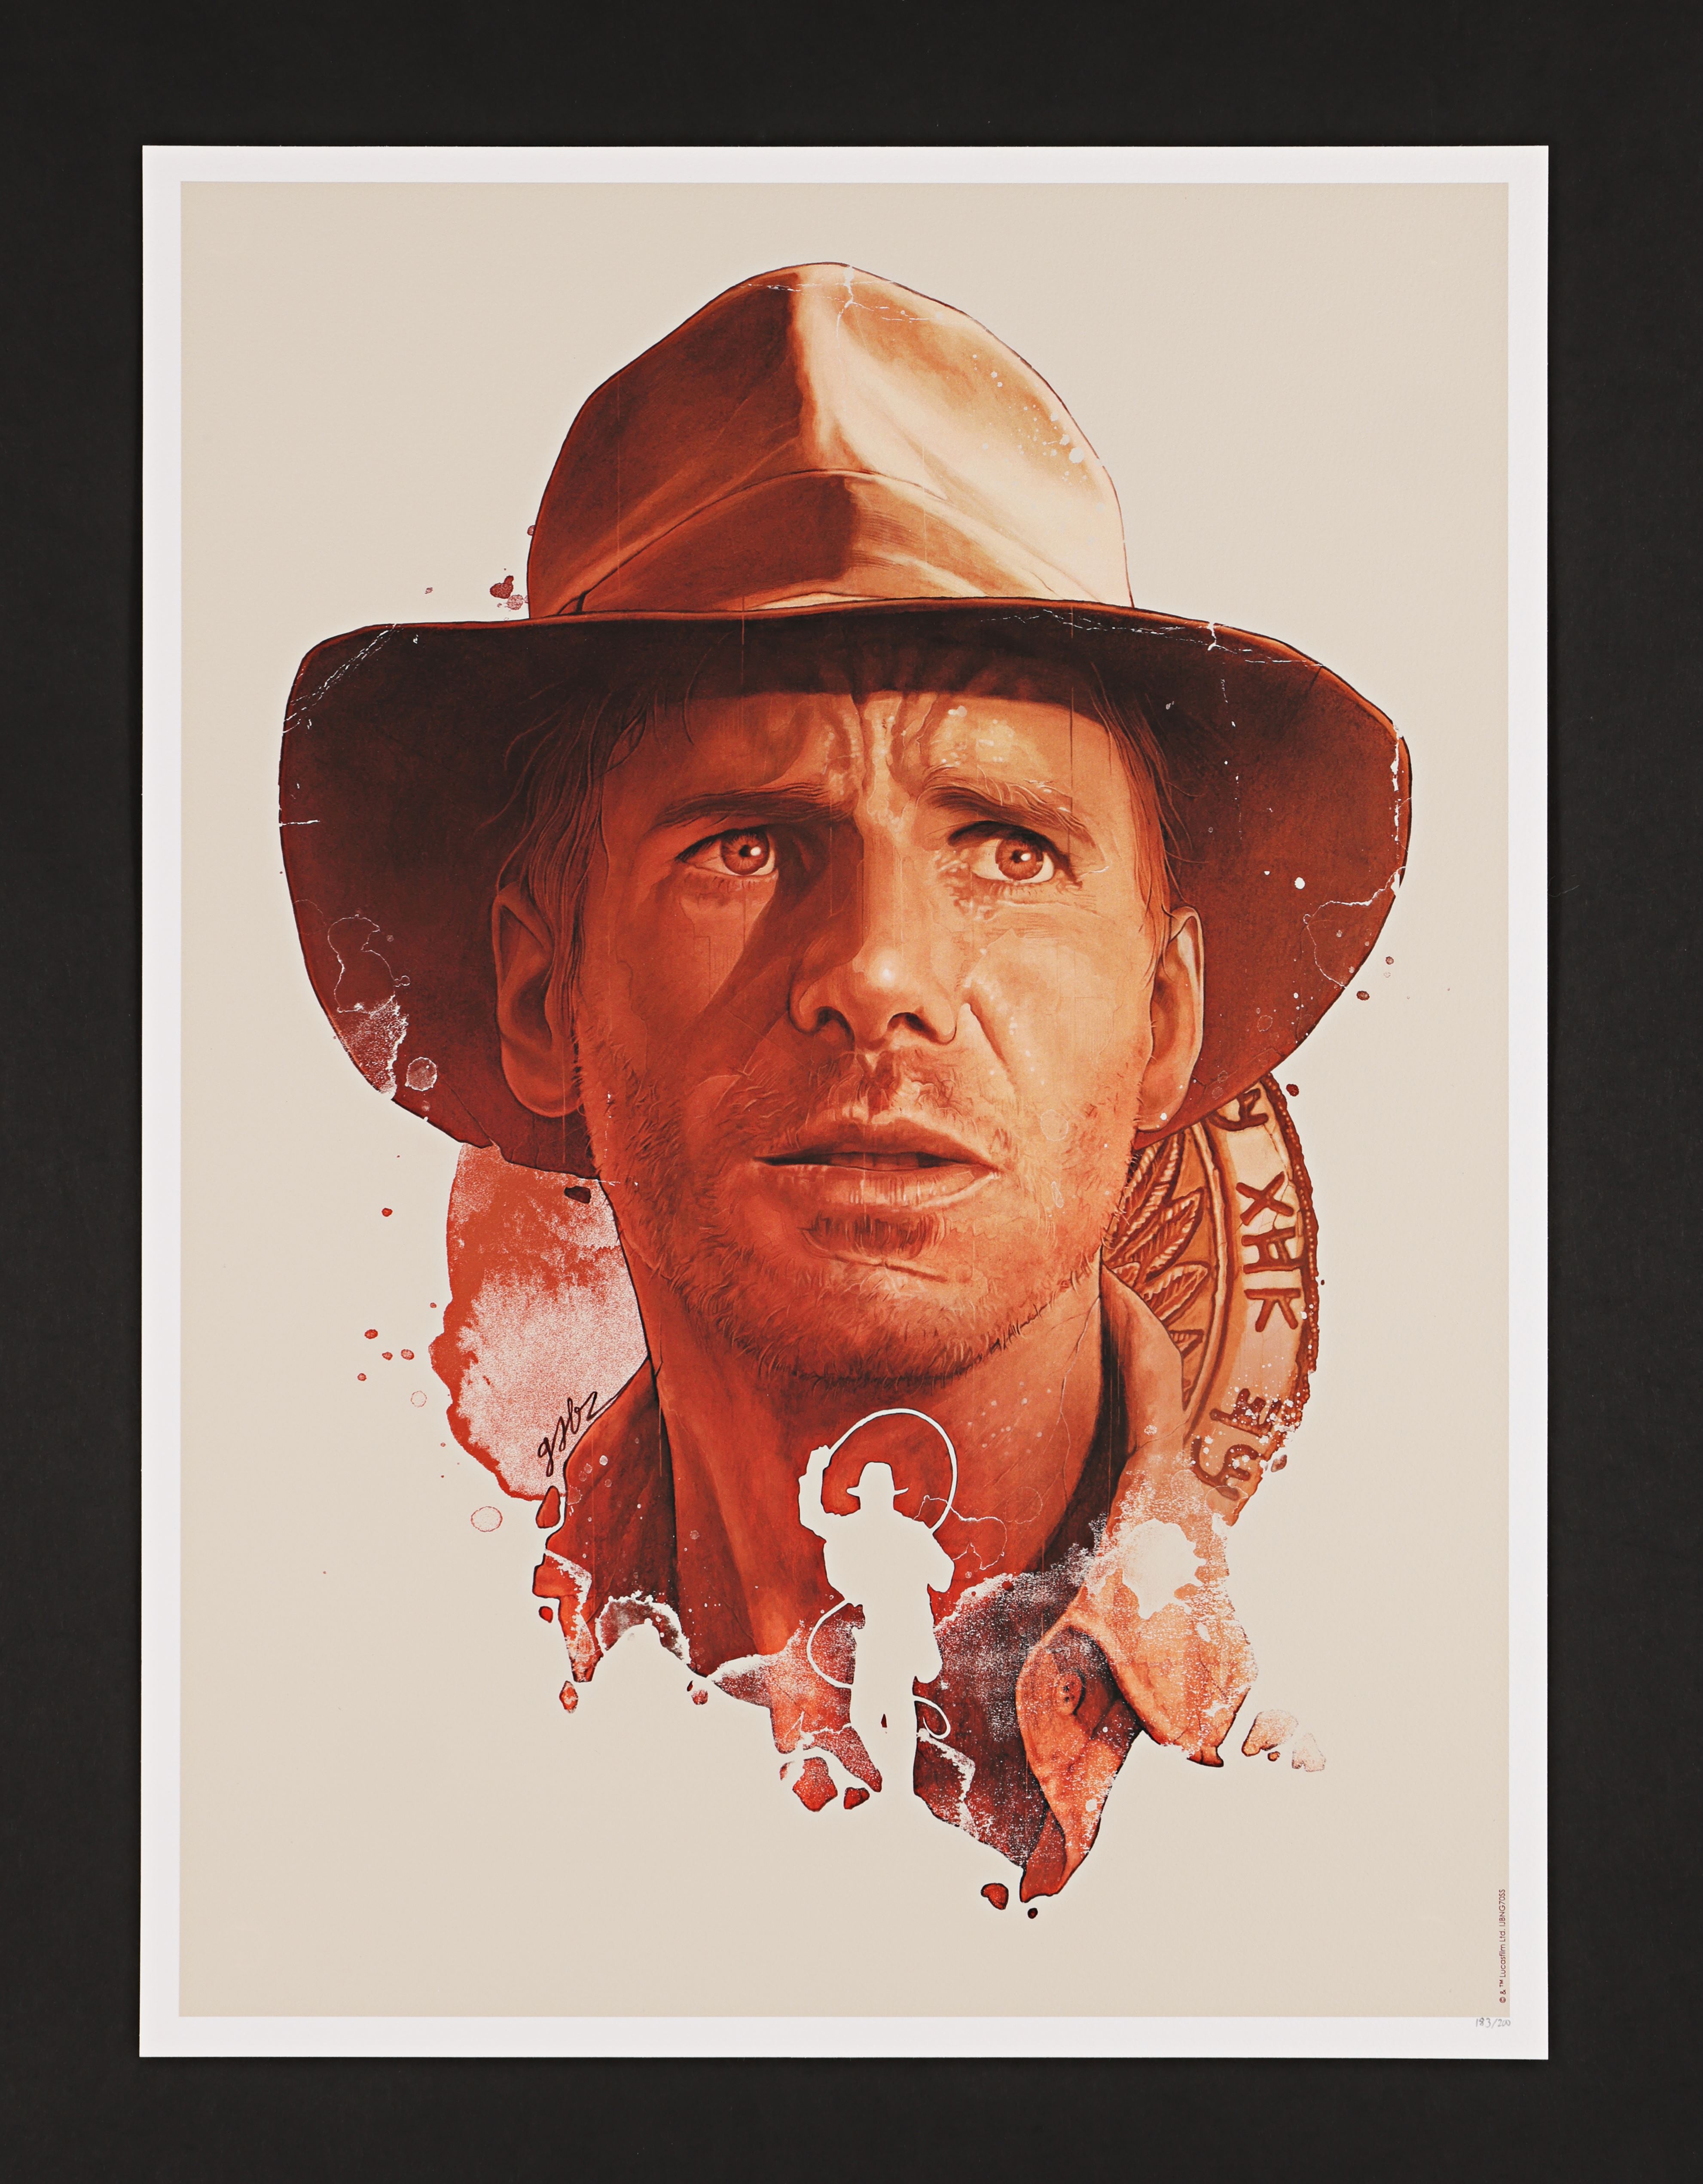 INDIANA JONES: ORIGINAL TRILOGY (1981-1989) - Two Hand-Numbered Limited Edition Prints by Grzegorz "